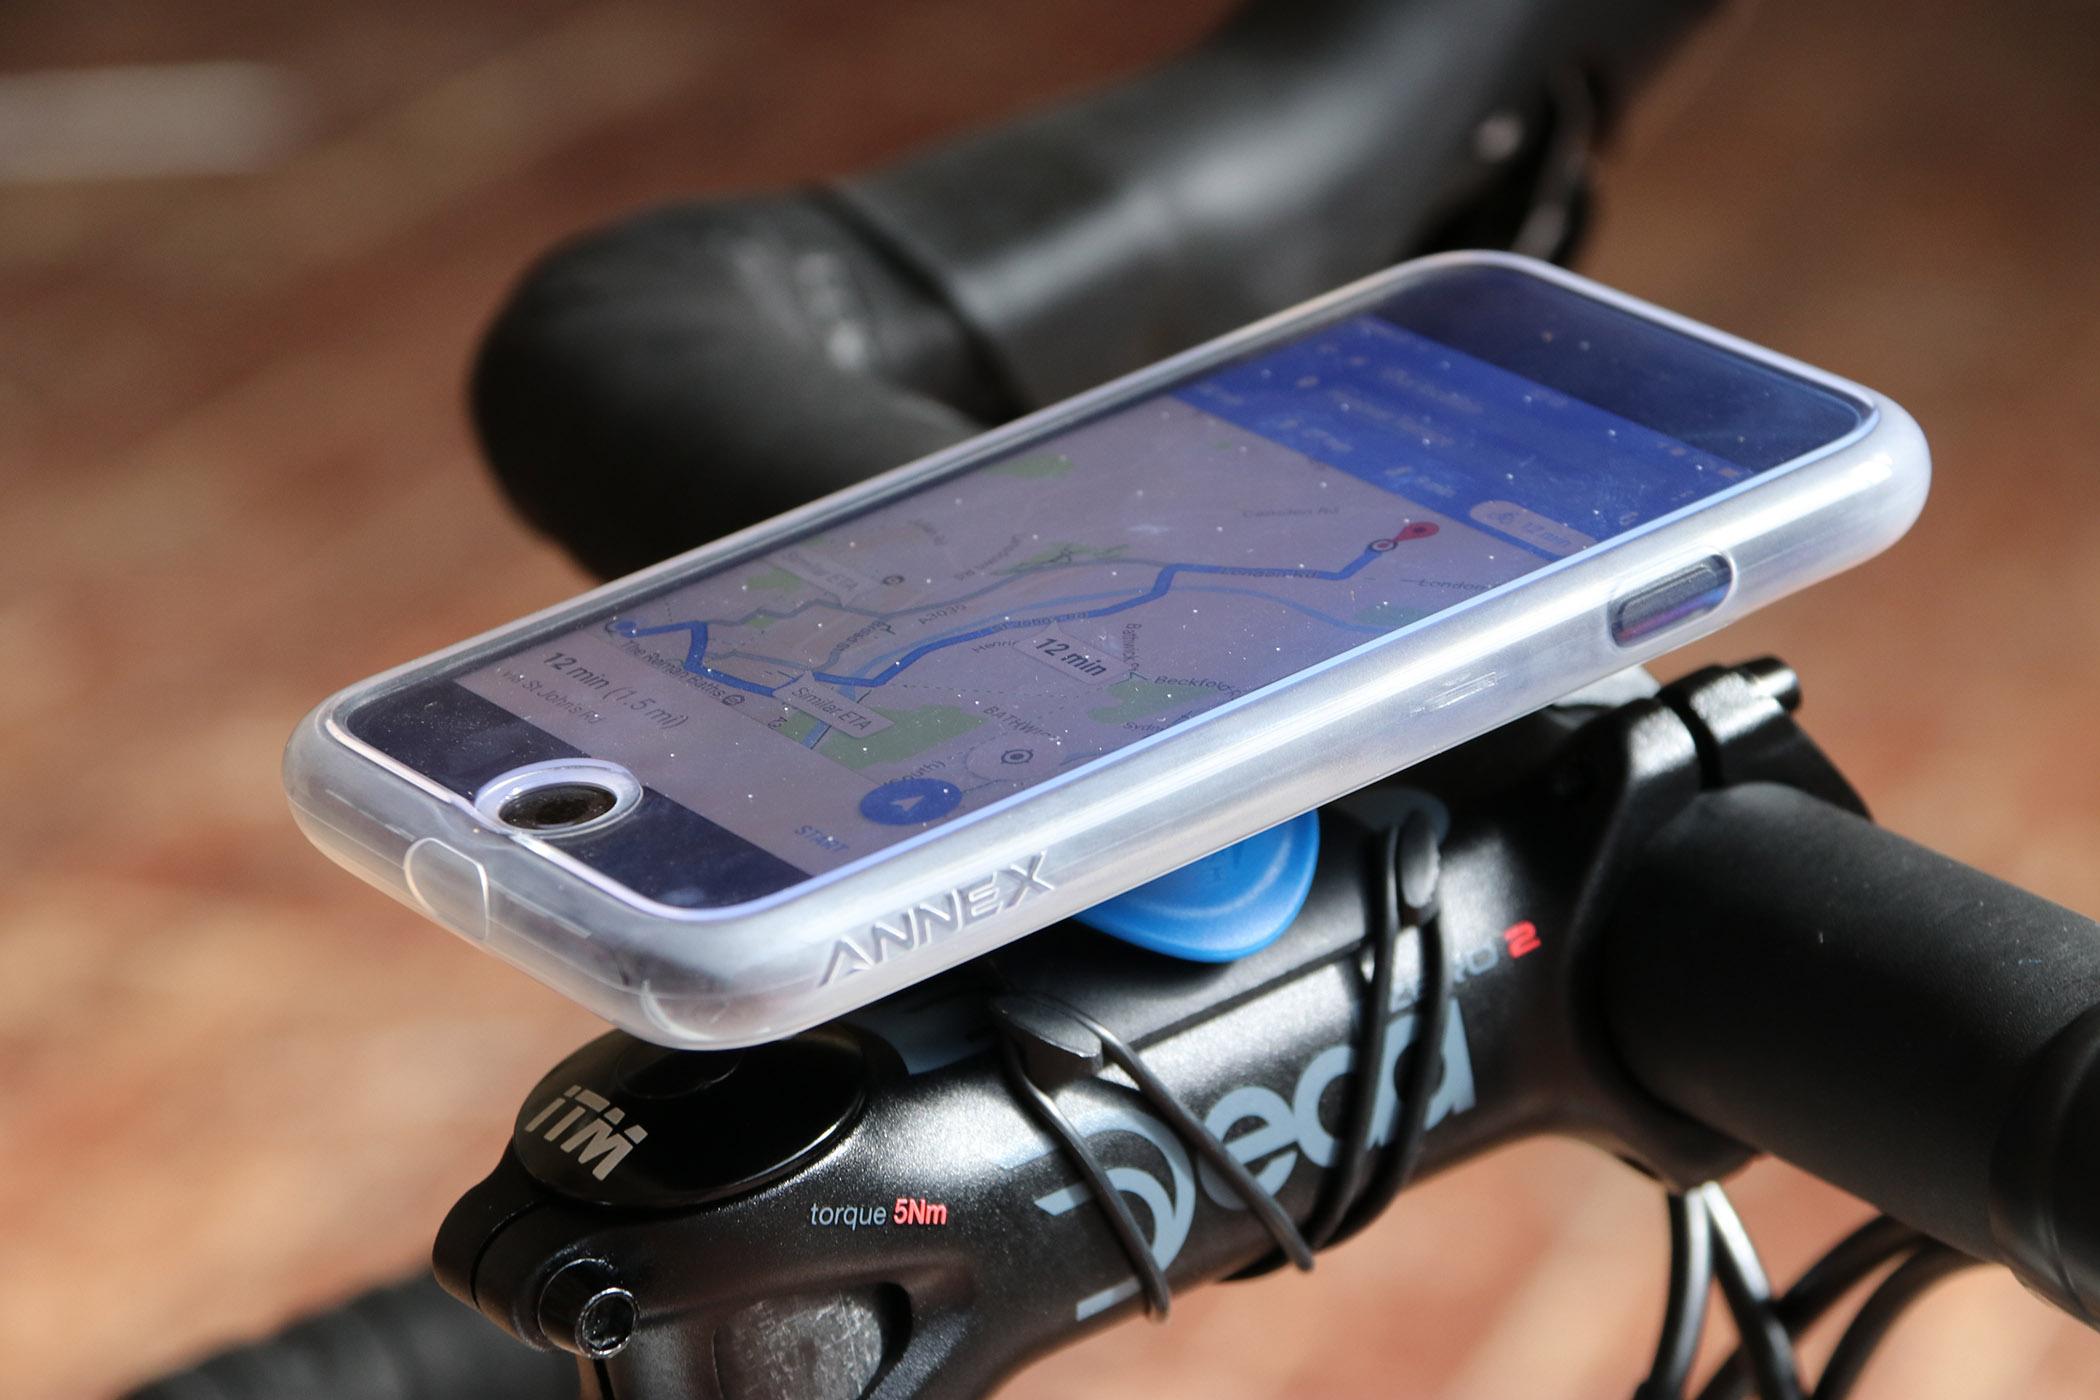 specialized phone mount